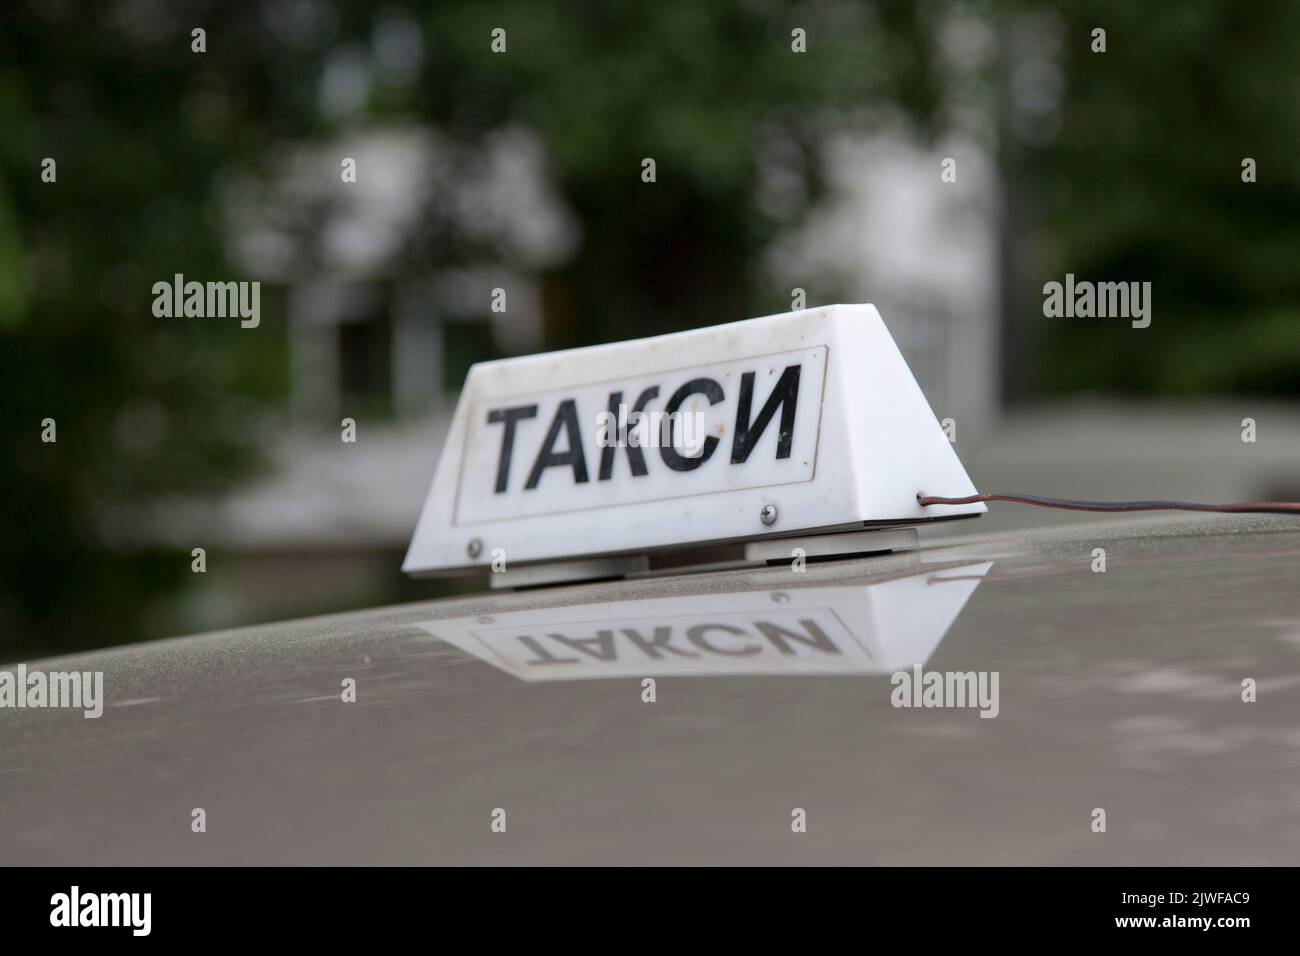 Taxi sign from Varna in Bulgaria. Stock Photo